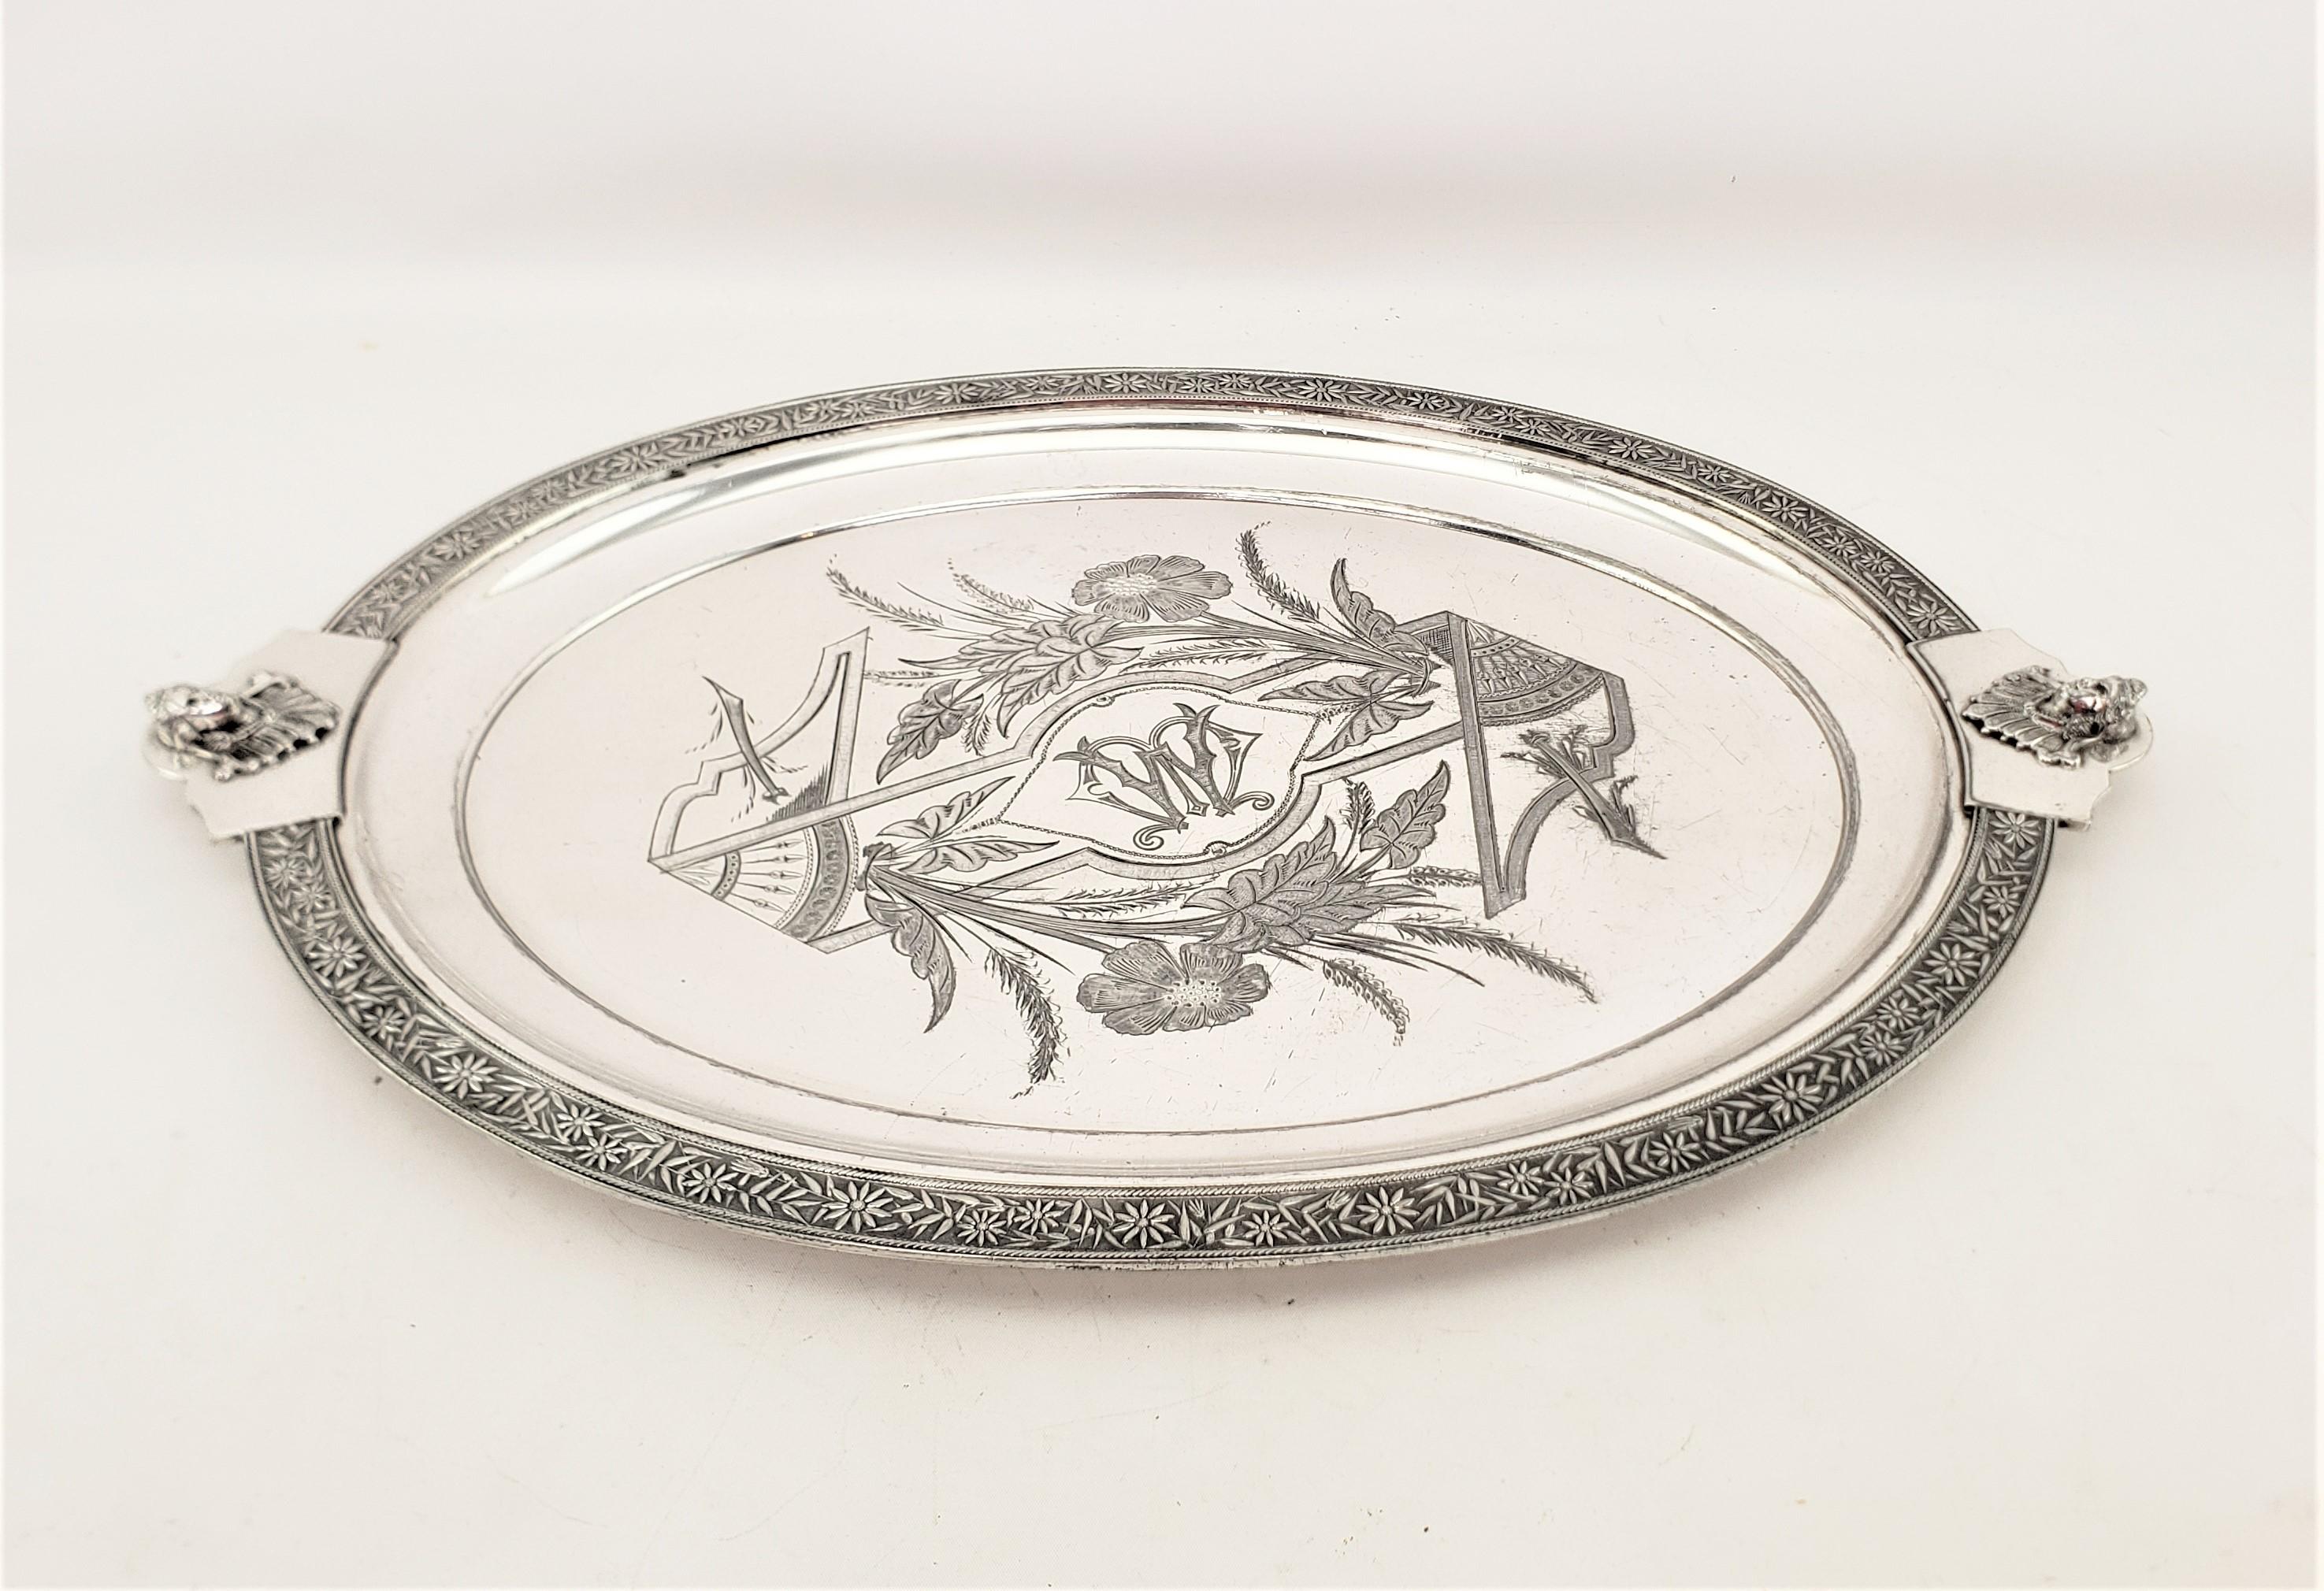 Neoclassical Revival Antique English Silver Plated Serving Tray with Neoclassical Styled Decoration For Sale